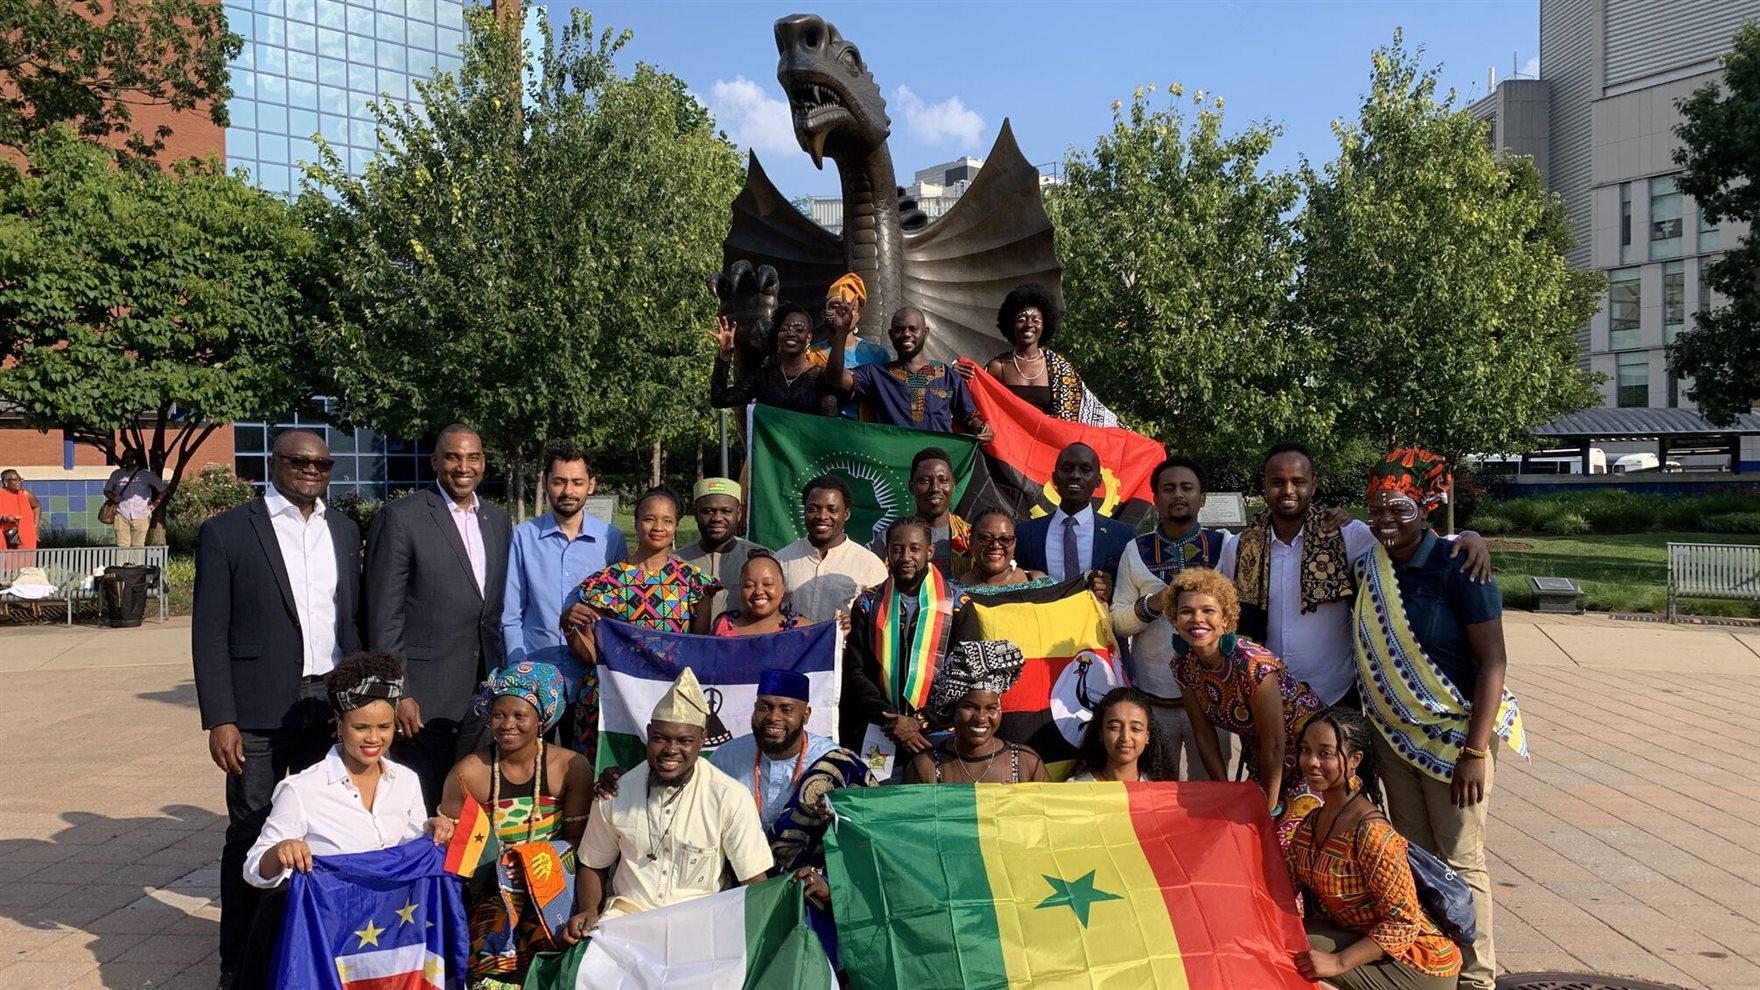 Two rows of people standing in front of the dragon statue on Drexel&#39;s campus holding flags of their home African countries.